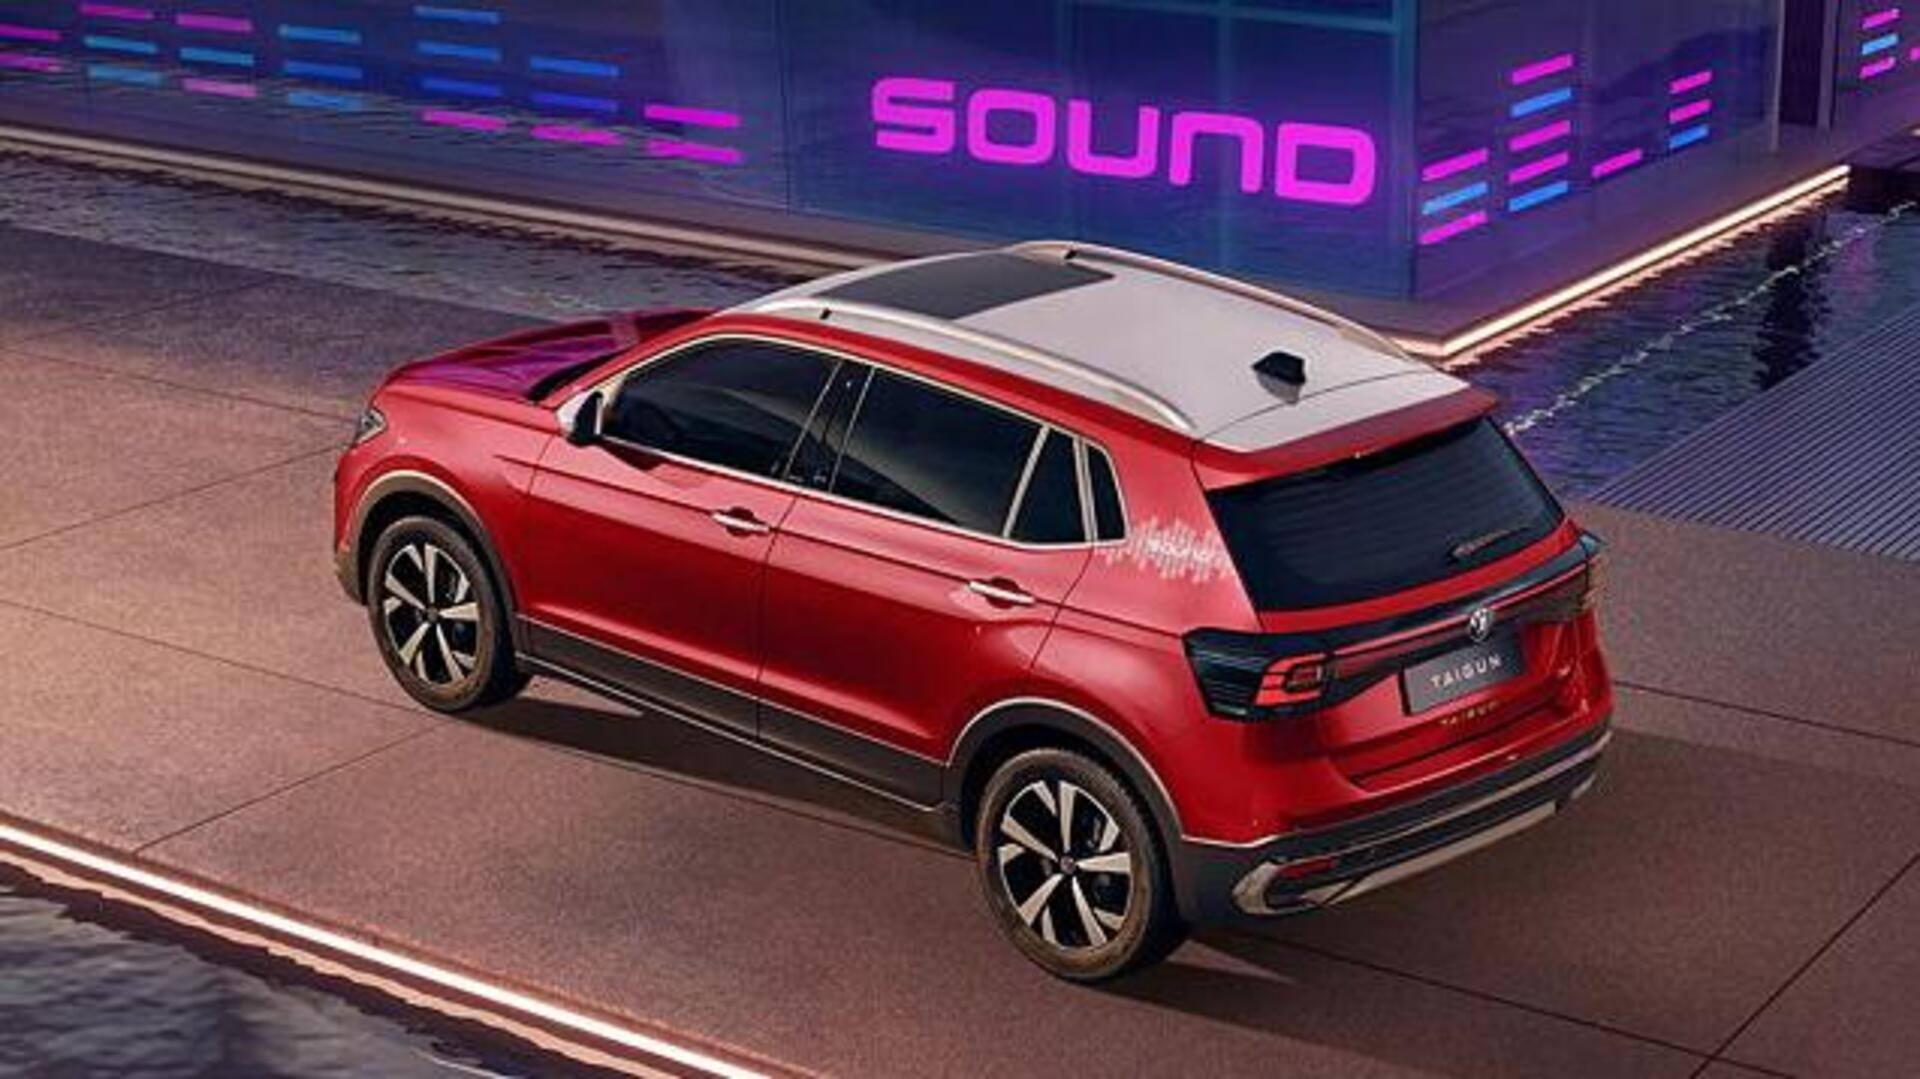 Volkswagen Taigun Sound Edition goes official at Rs. 16.3 lakh